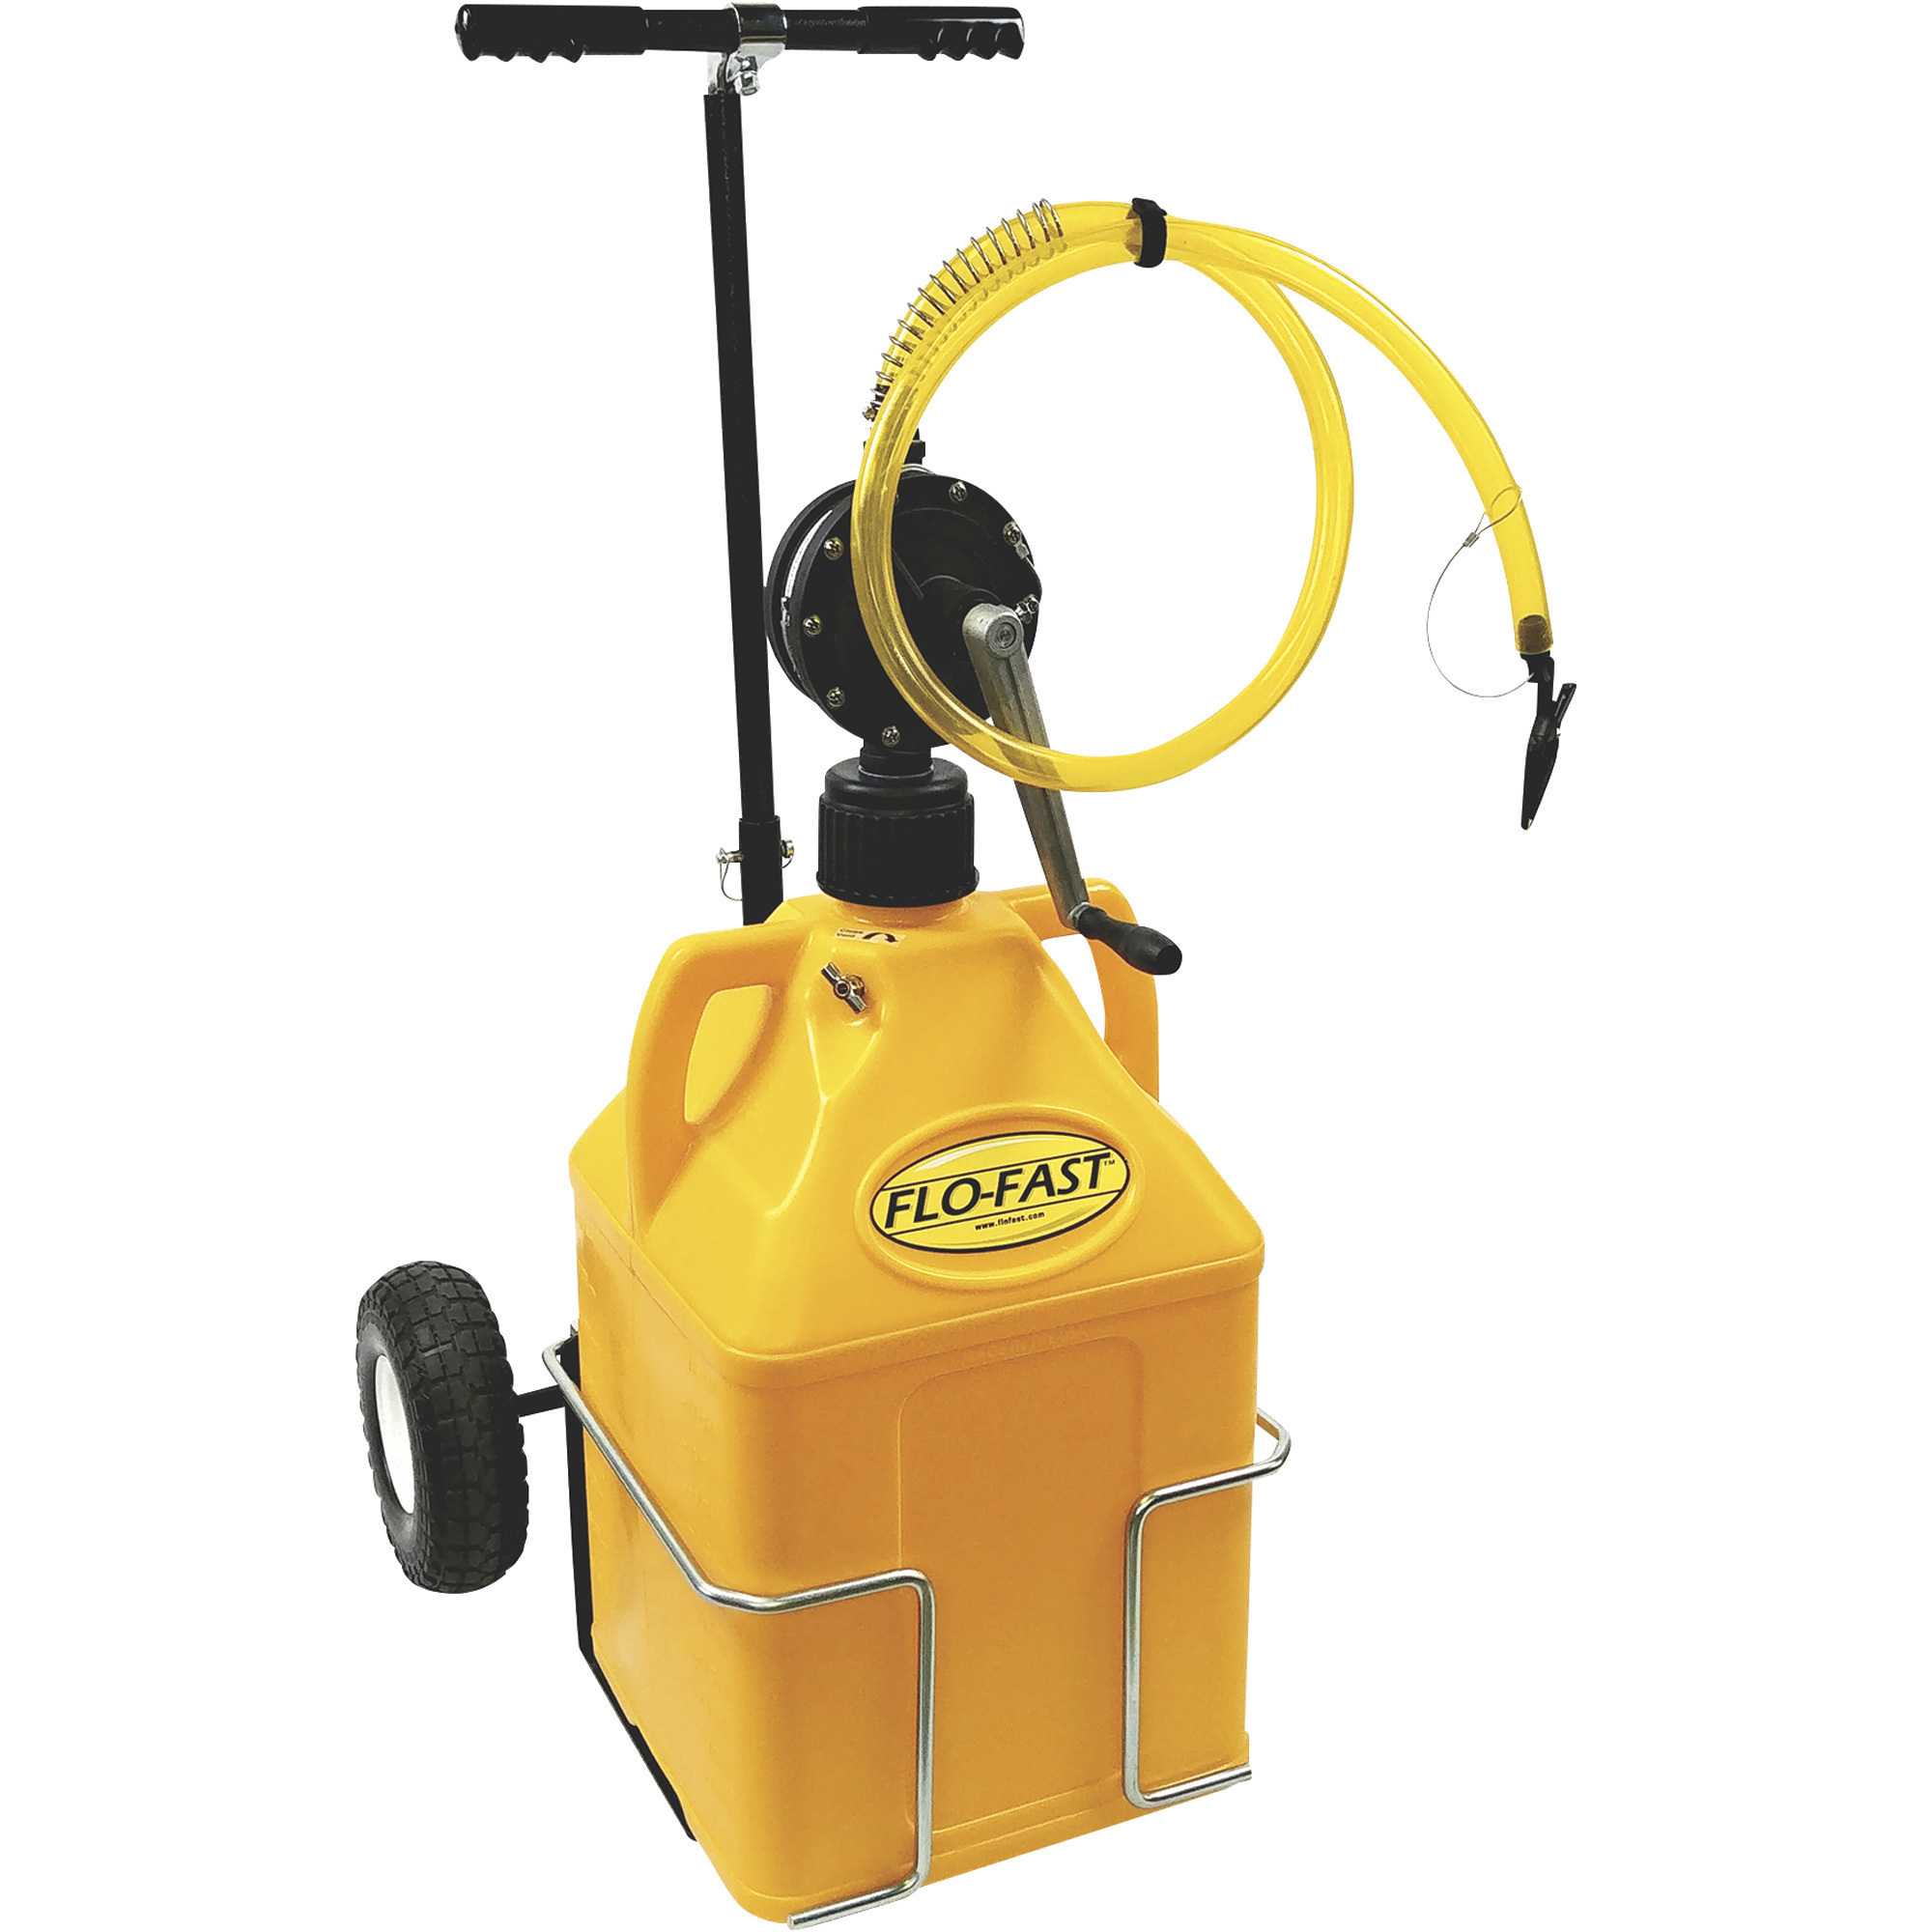 FLO-FAST Diesel Container With Pump and Cart, 15-Gallon, Yellow, For Diesel, Model 31015-Y